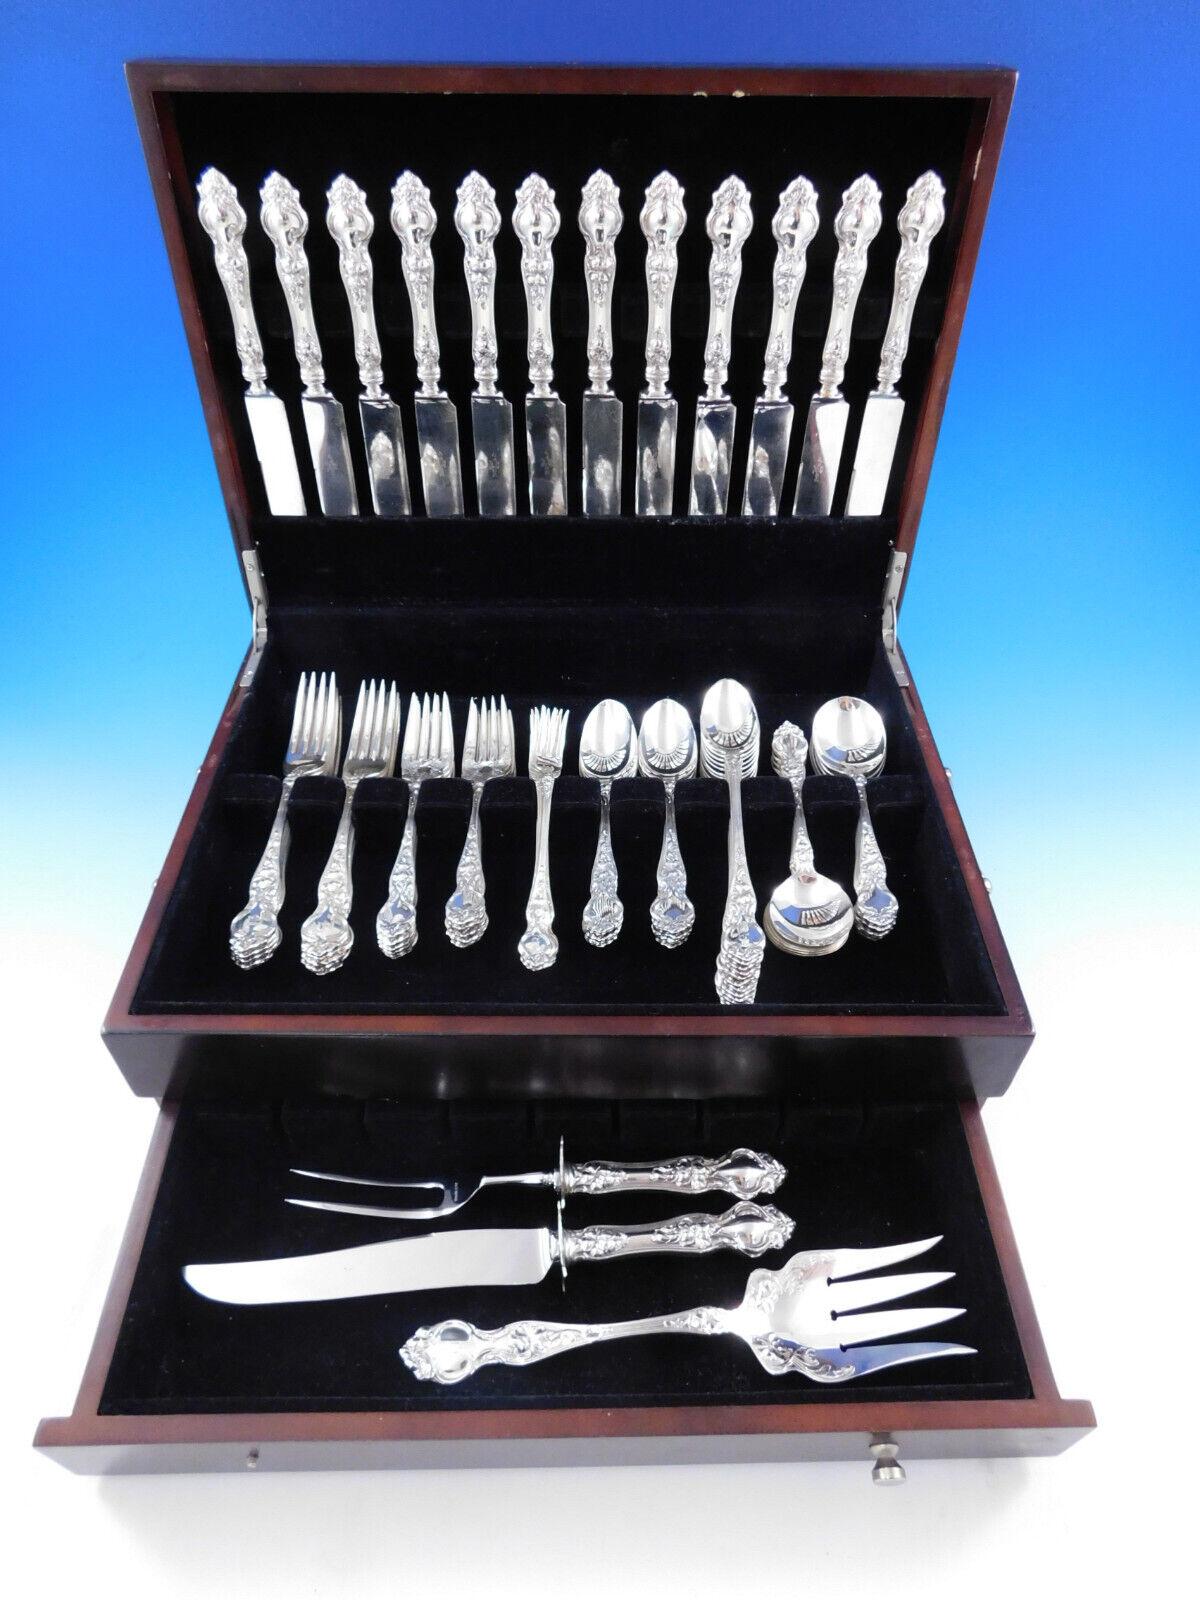 Violet by Wallace sterling silver Flatware set - 87 pieces. This set includes:

12 Knives with silverplated blunt blades, 9 1/8